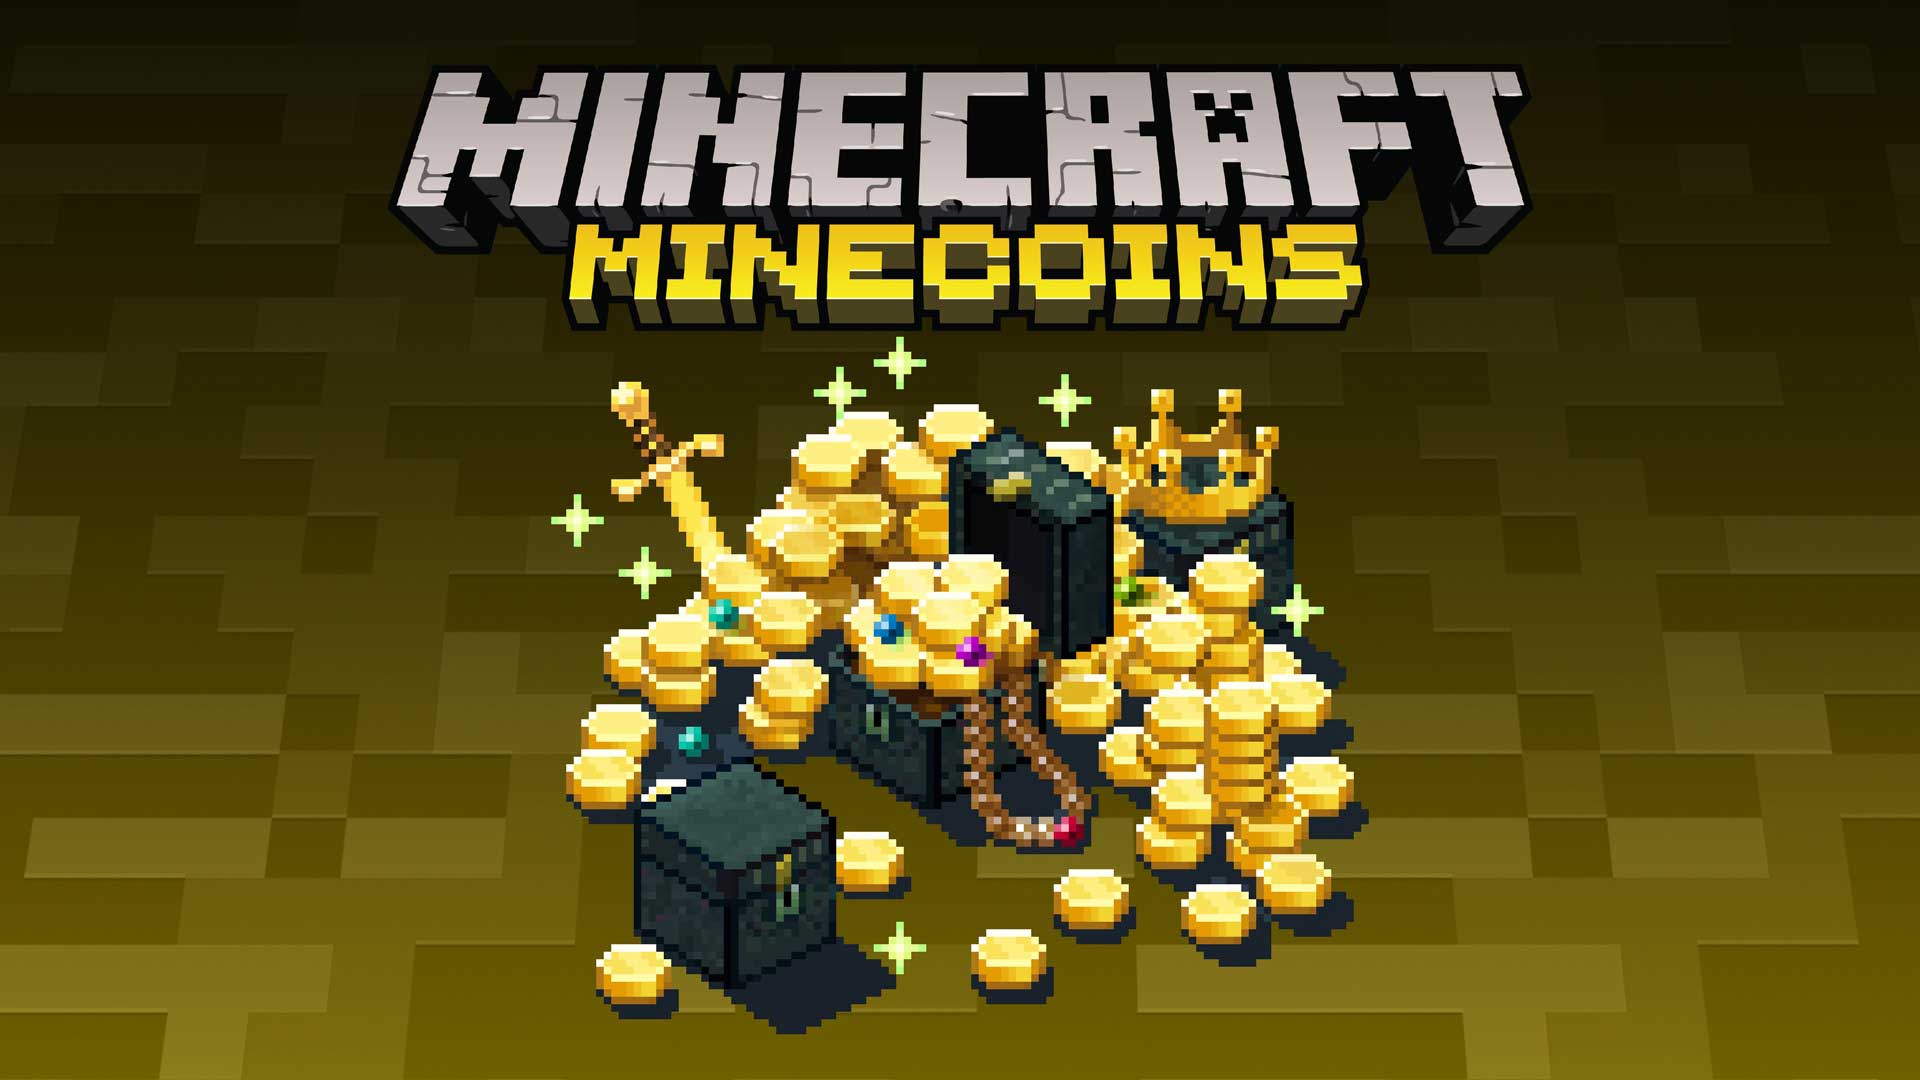 Minecraft Coins, Gifted Instantly, giftedinstantly.com